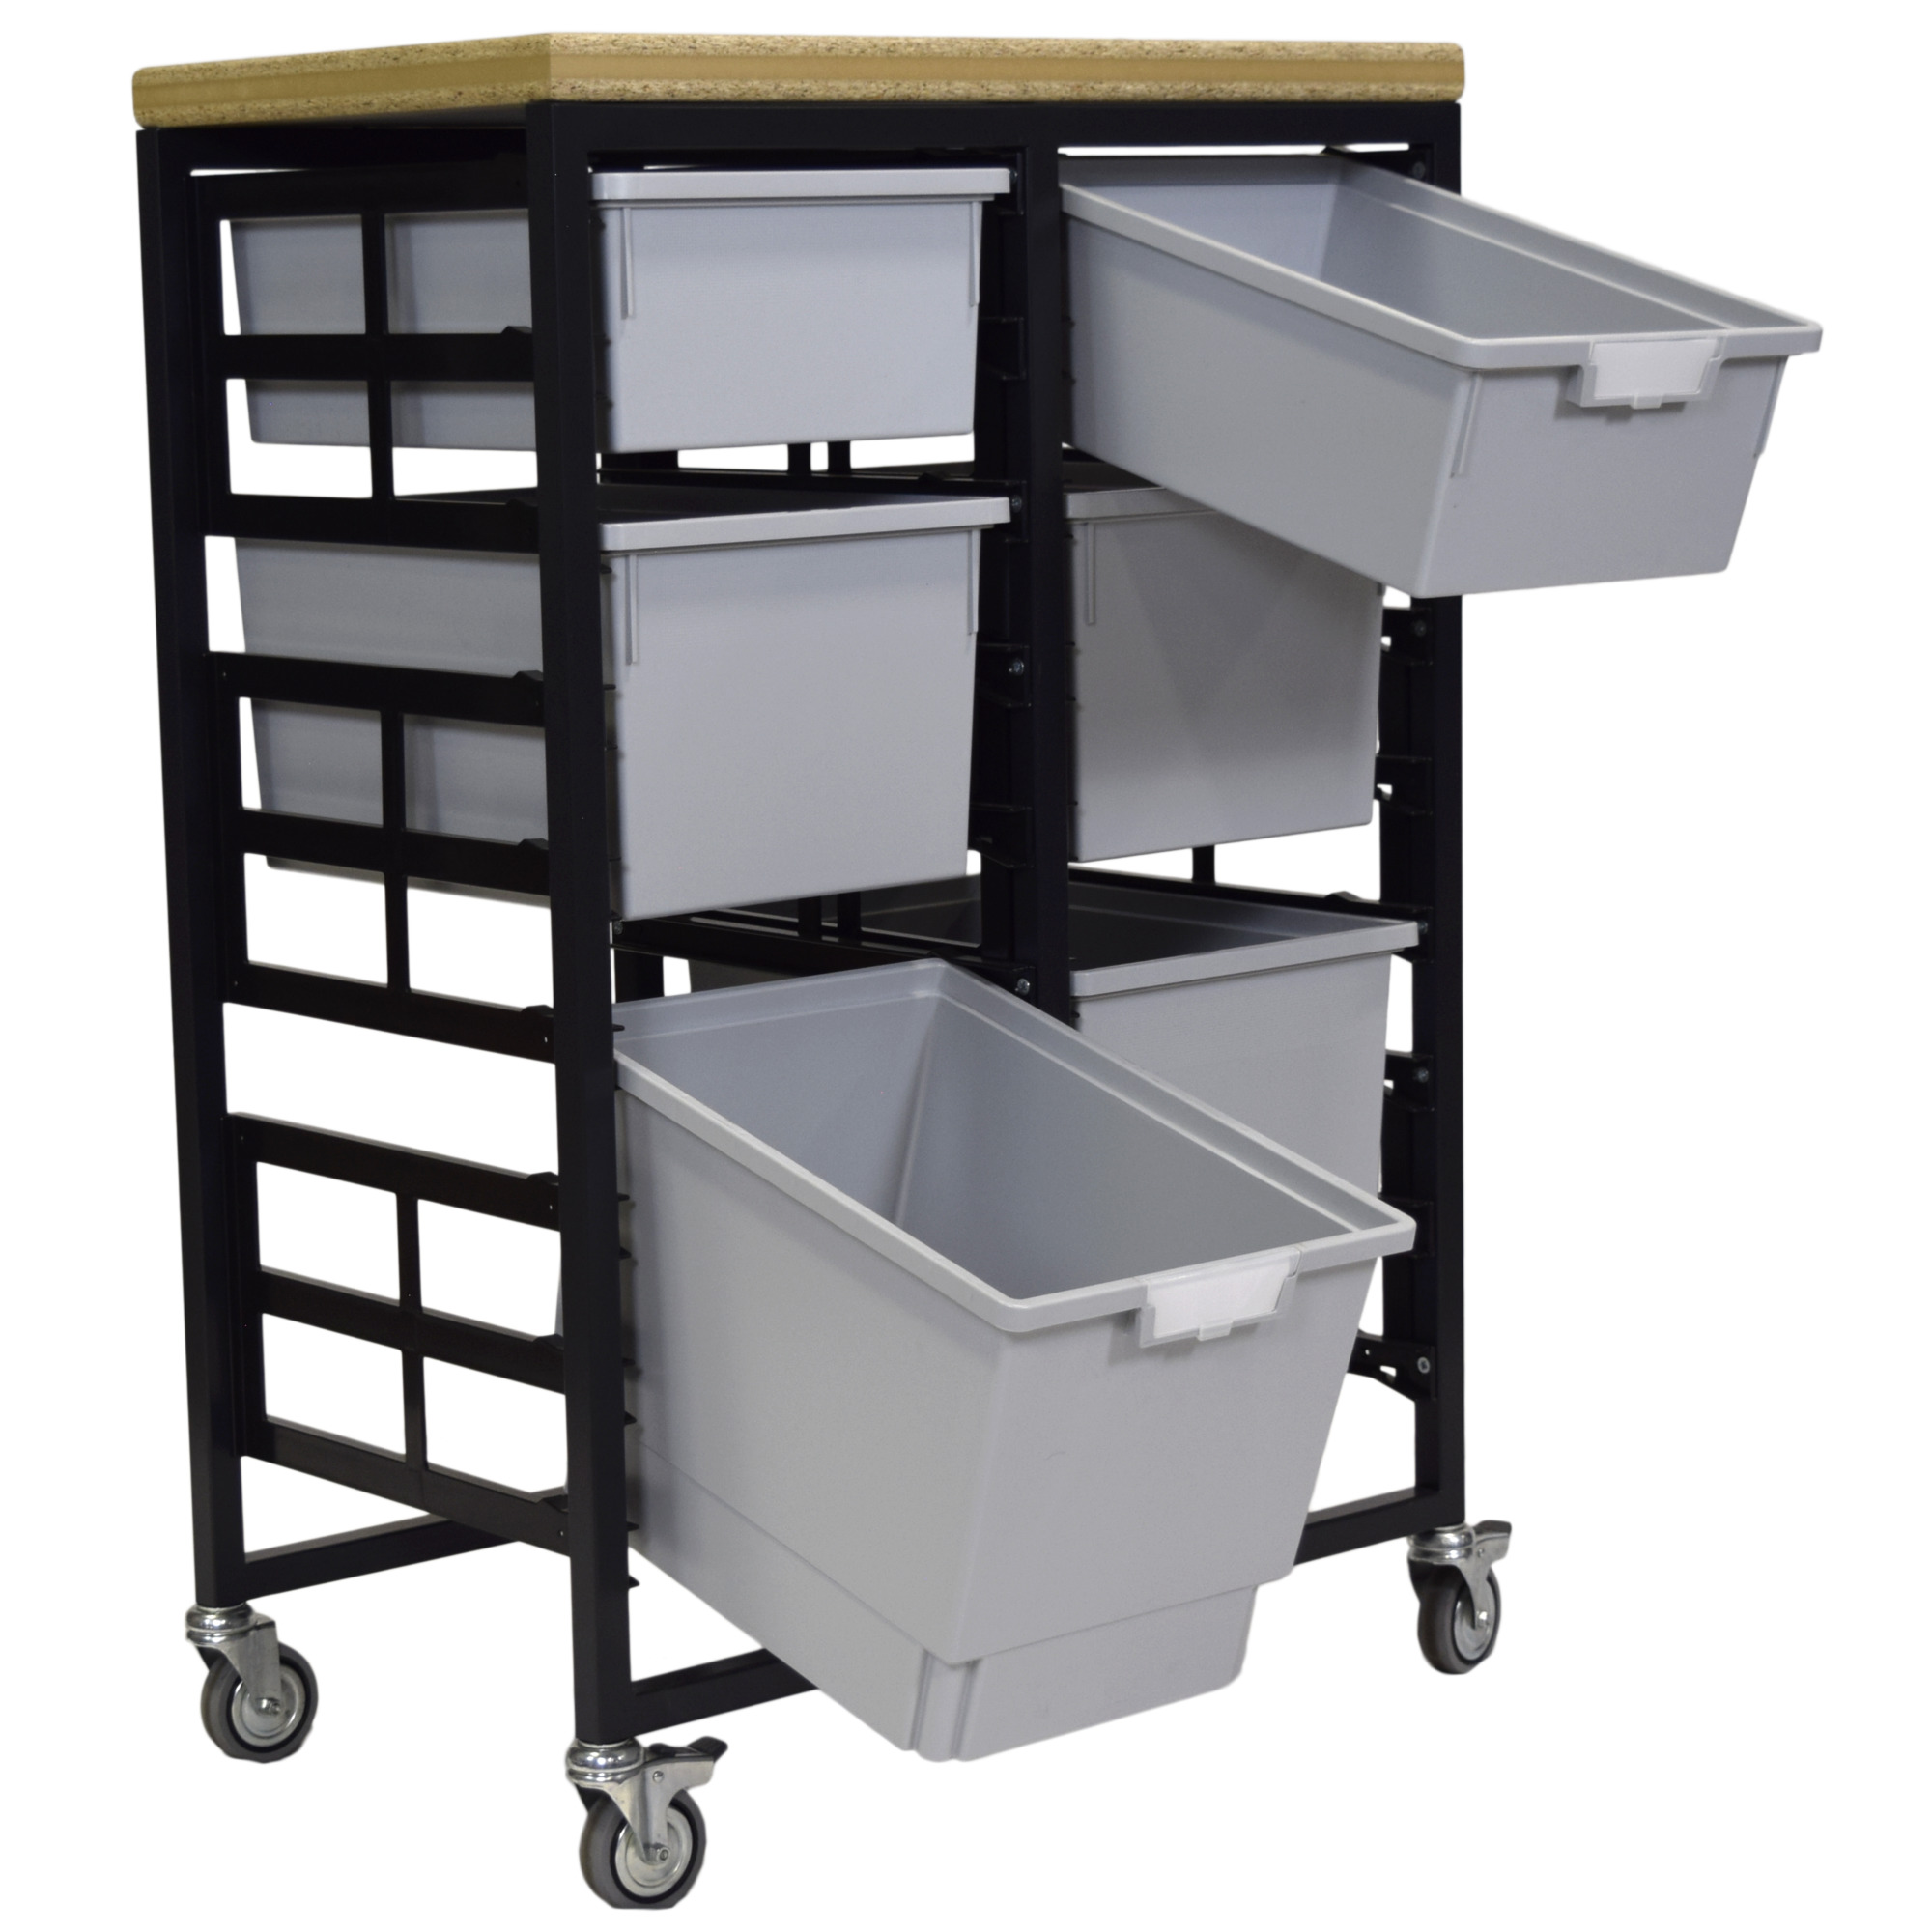 Certwood StorWerks, Mobile Work Station w/Wood Top -6 Trays-Gray, Included (qty.) 6, Material Plastic, Height 12 in, Model CE2102DGGC-2D2T2QLG